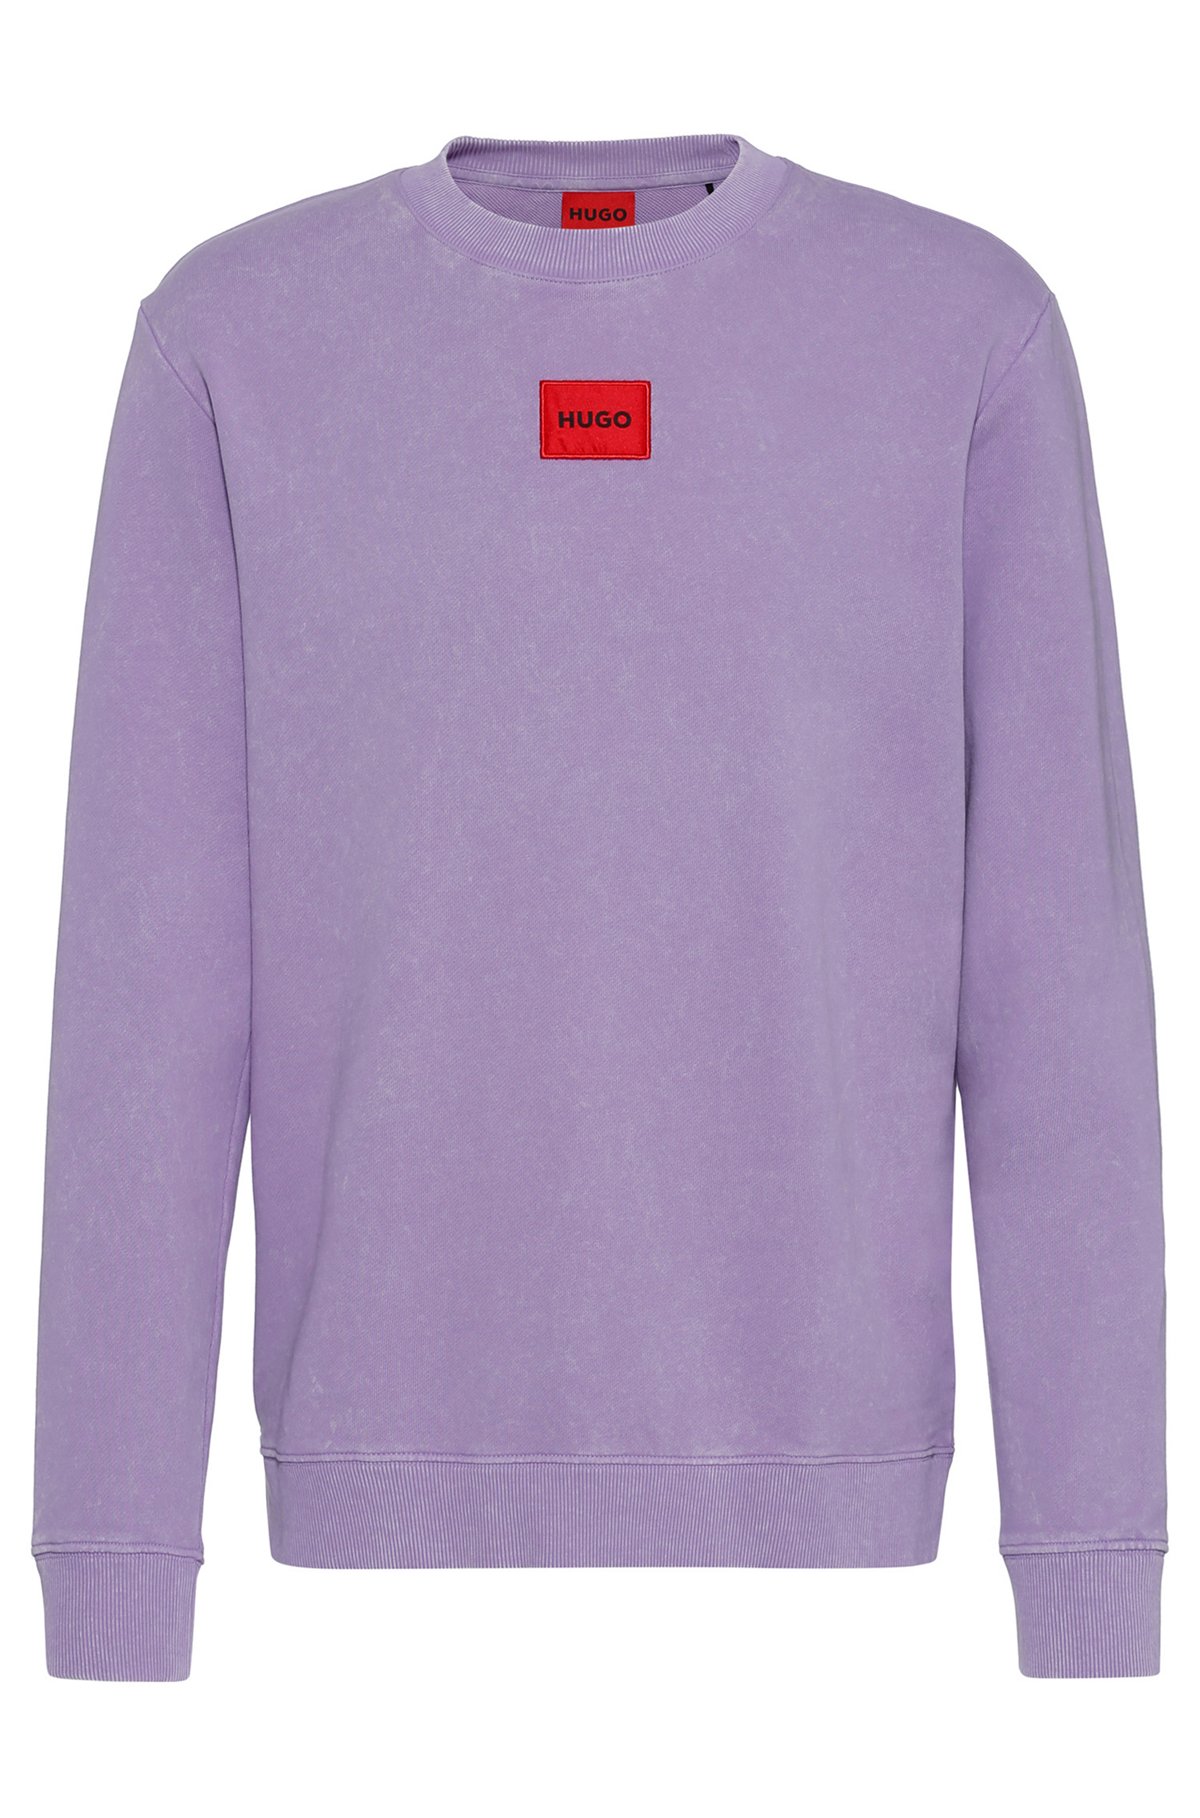 HUGO - Relaxed-fit sweatshirt in powder-dyed French terry cotton